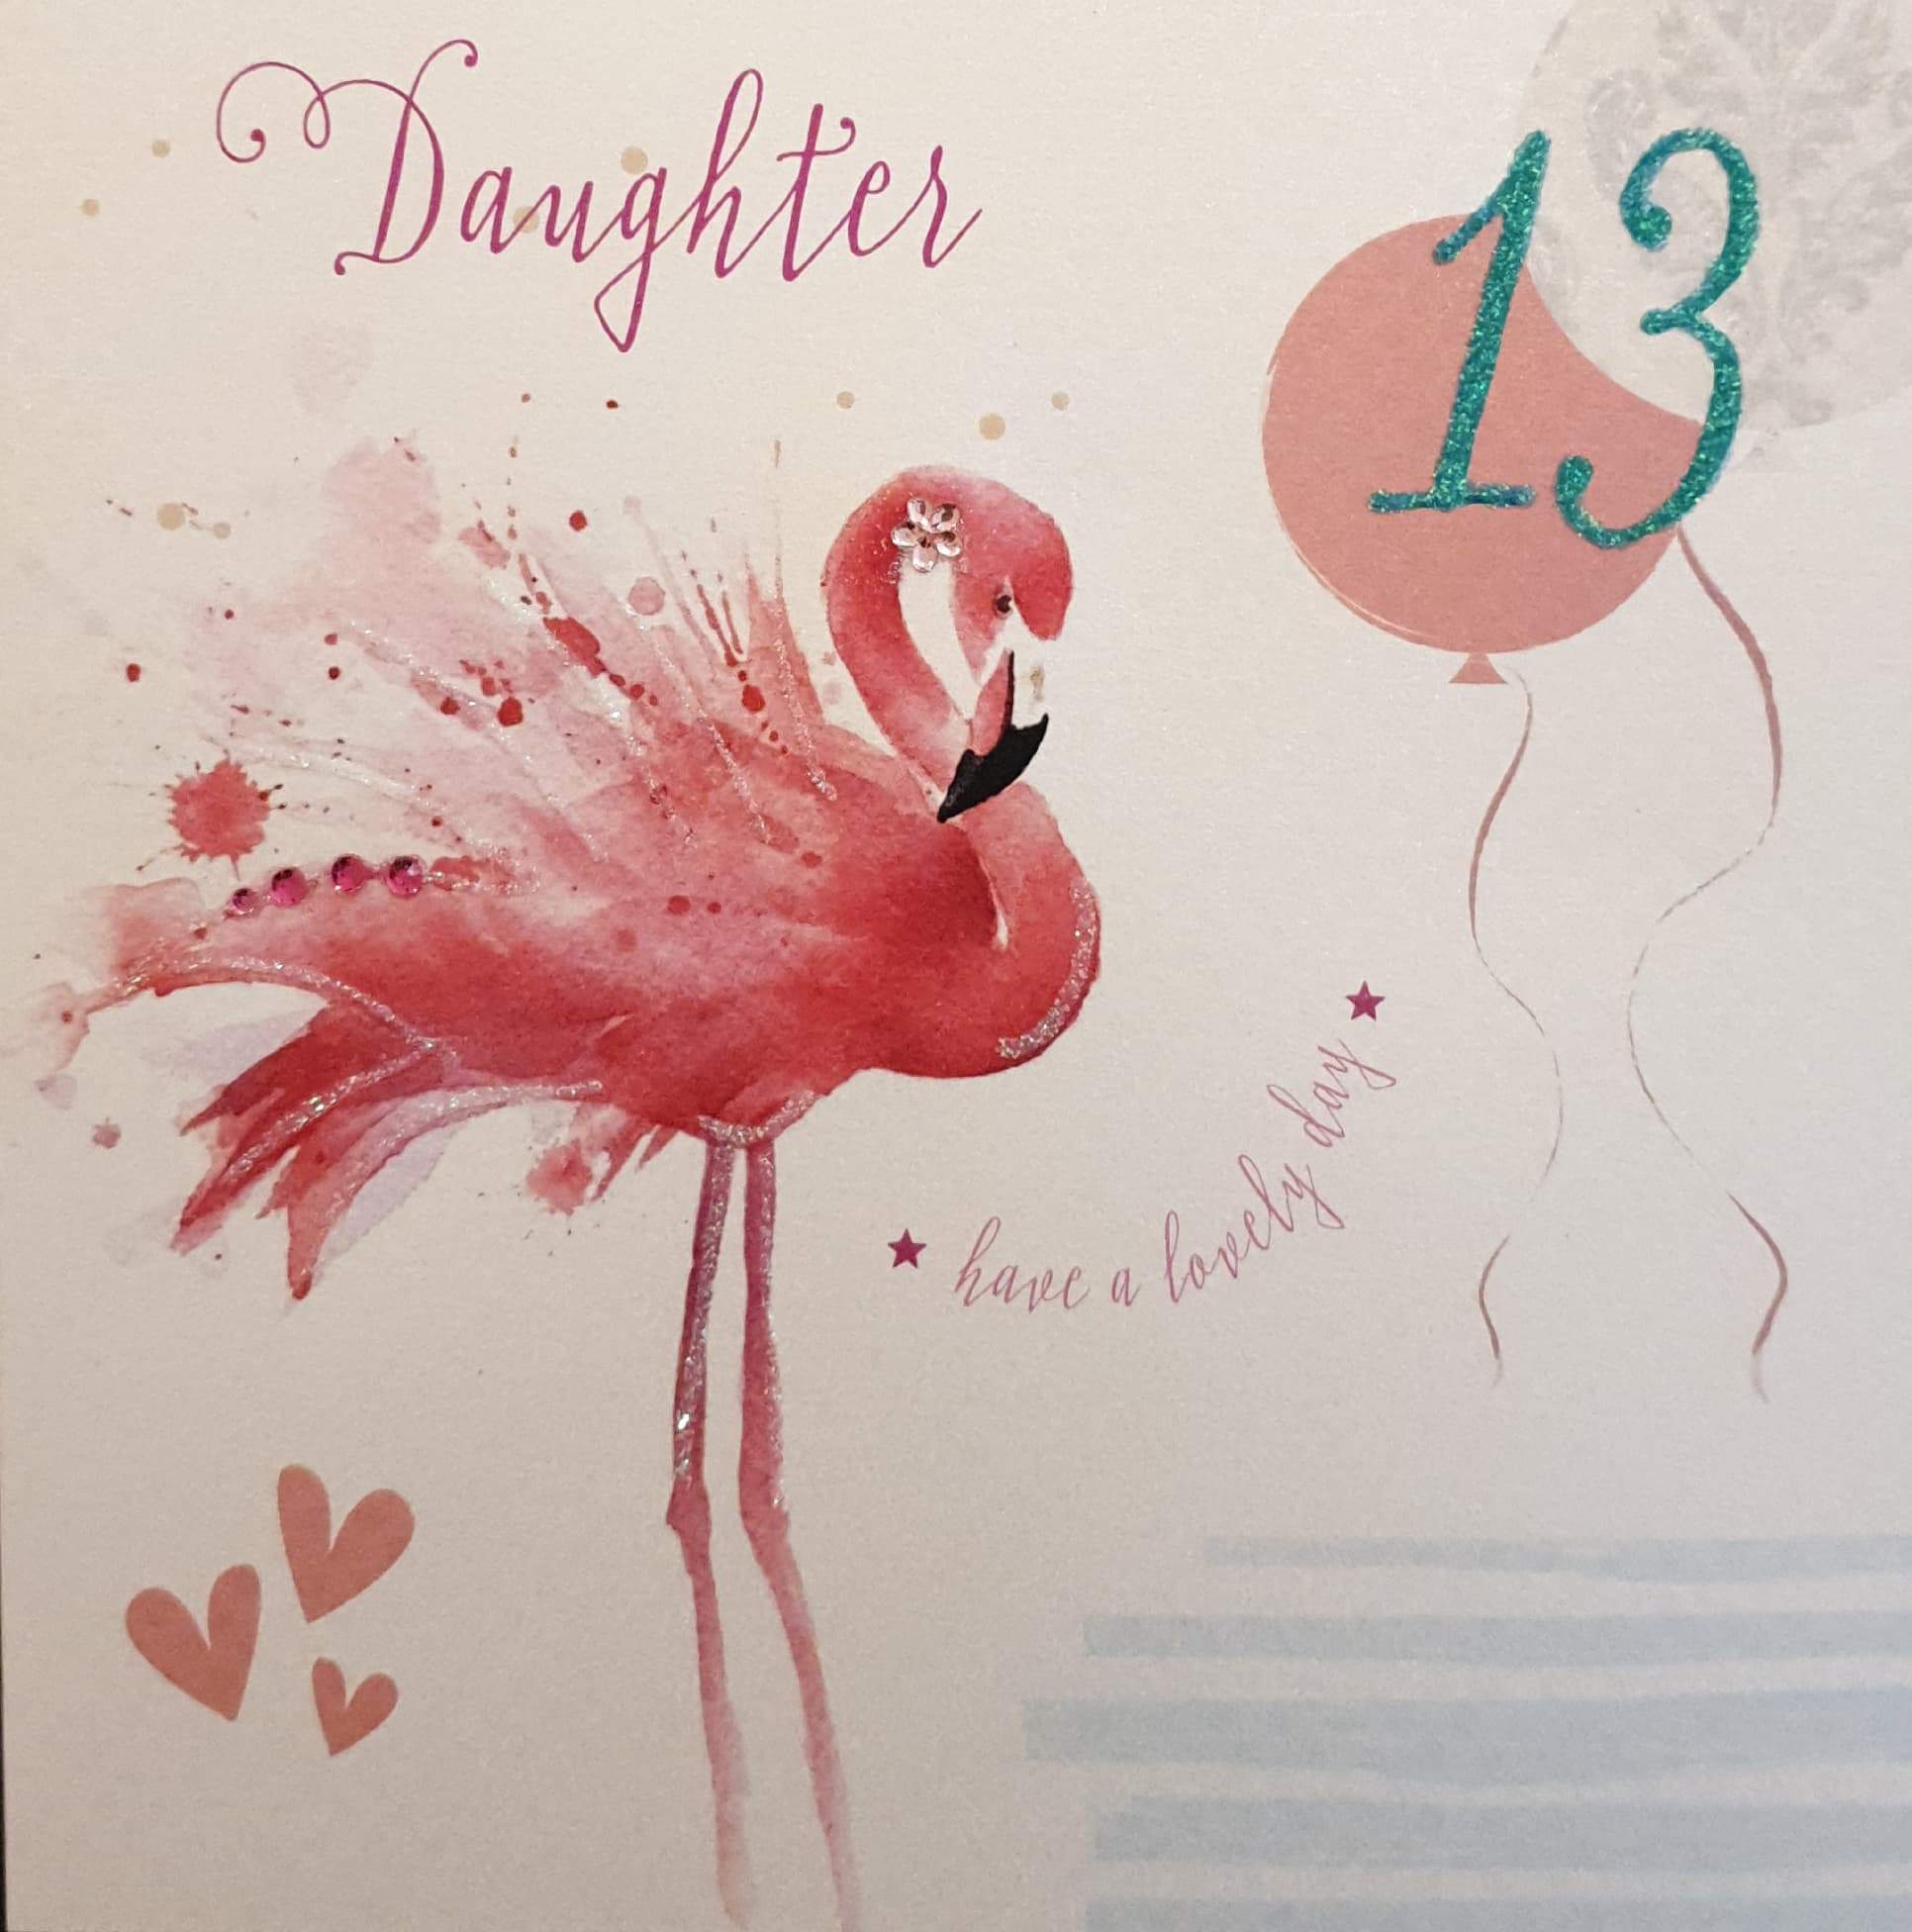 Birthday Card - Daughter - 13th Birthday / Pink Flamingo with Hearts & Balloons